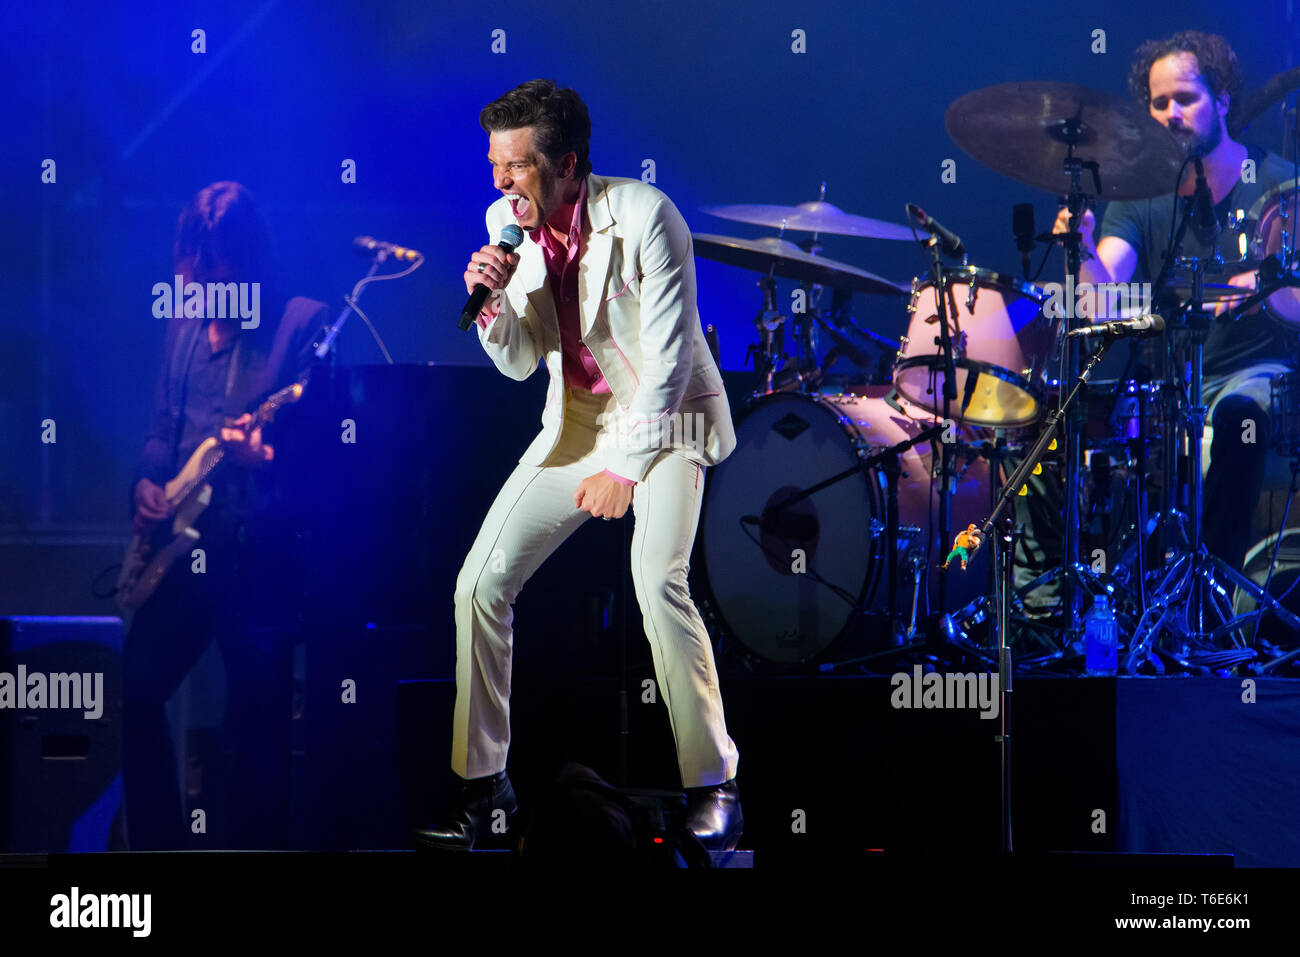 BENICASSIM, SPAIN - JUL 20: The Killers (famous indie rock band) perform in concert at FIB Festival on July 20, 2018 in Benicassim, Spain. Stock Photo